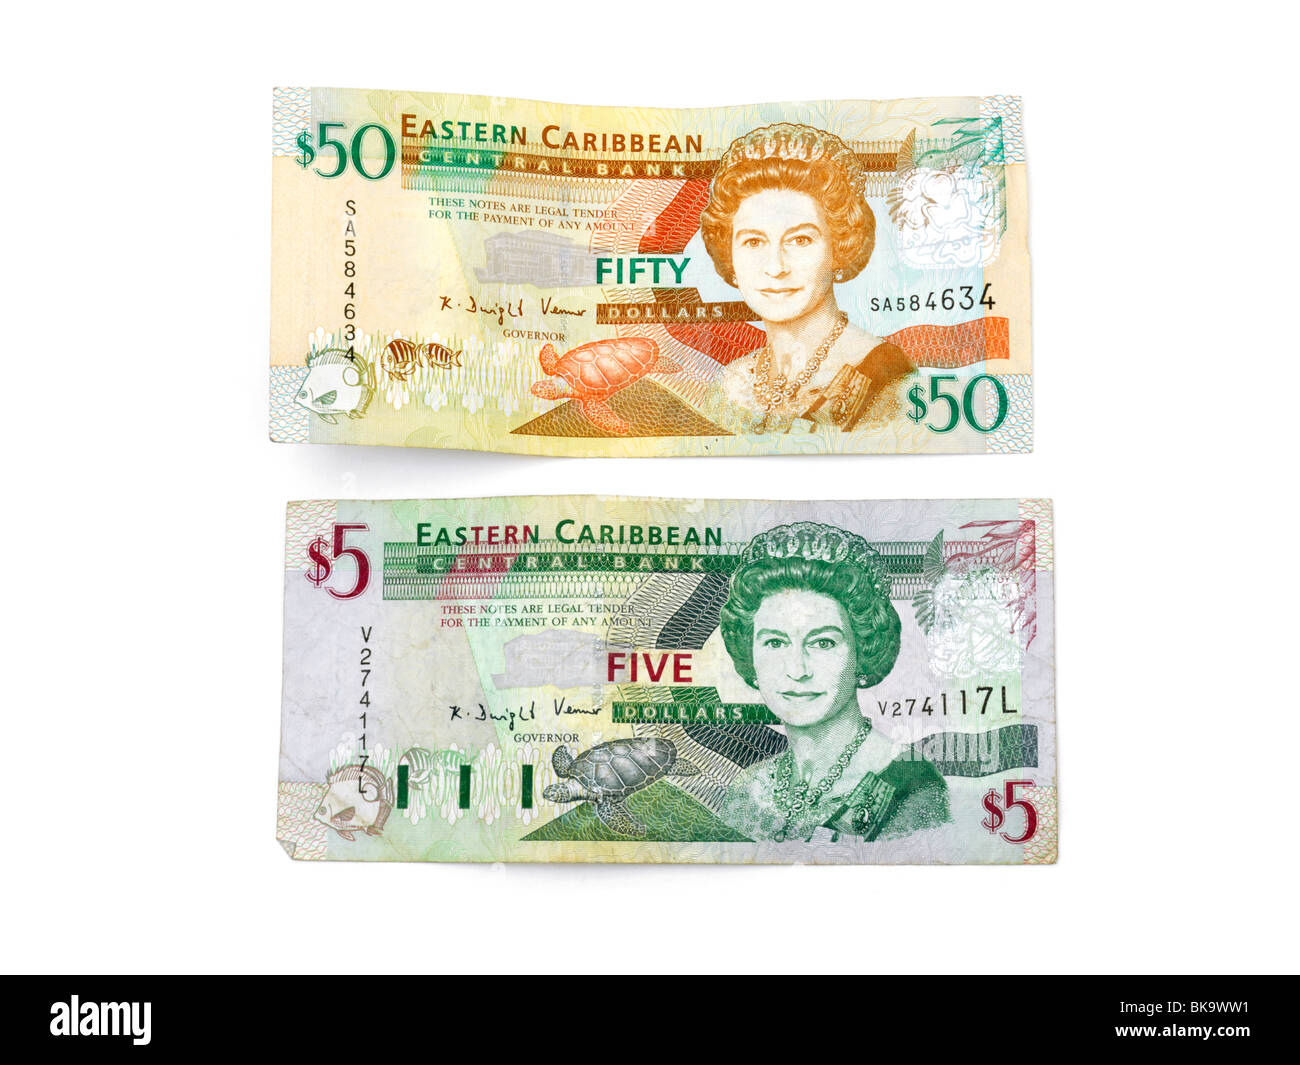 Eastern Caribbean Banknotes 5 And 50 Dollars Stock Photo